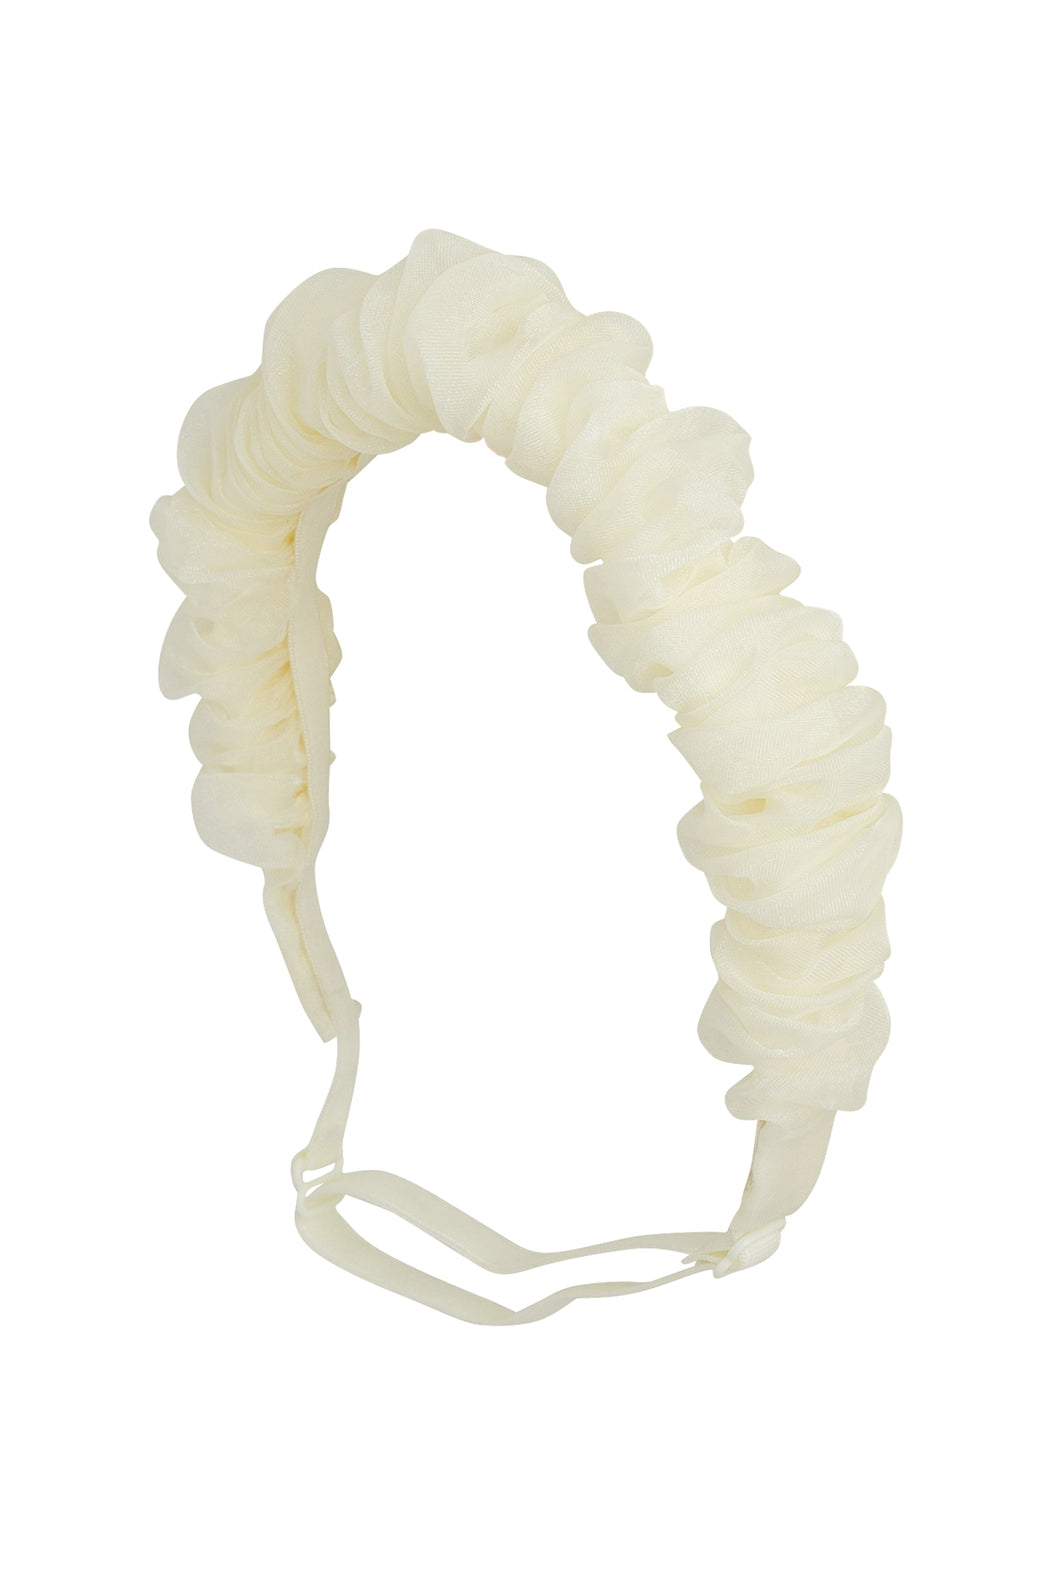 Organza Bunches Wrap - Ivory